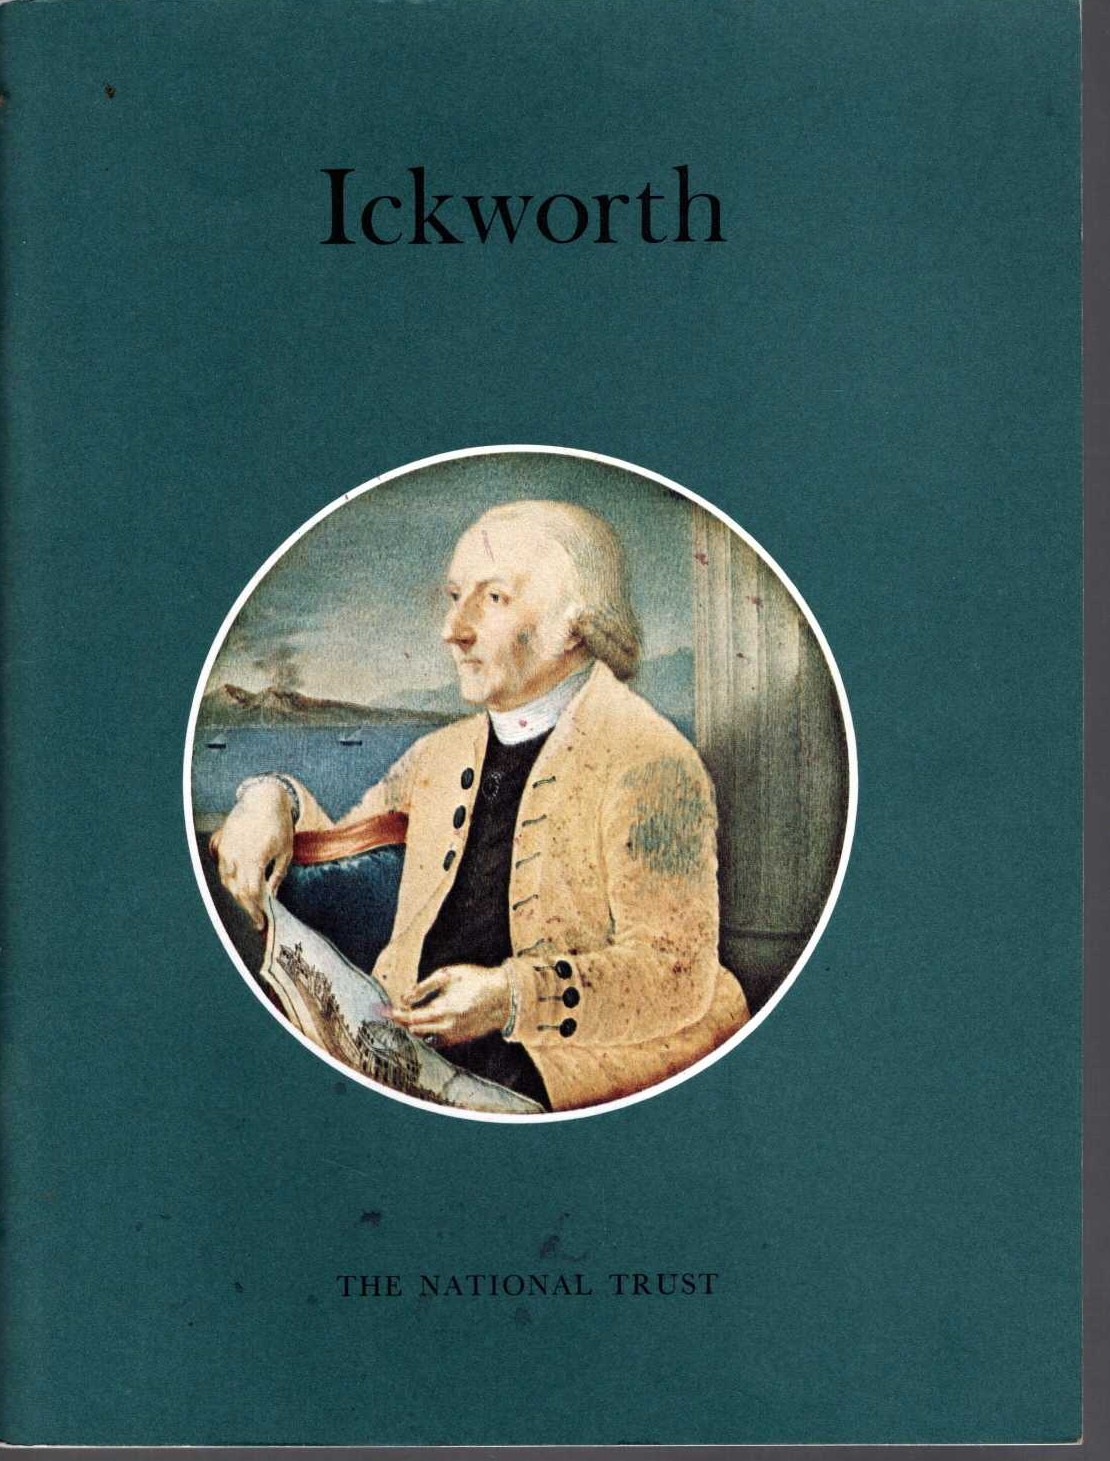 
\ ICKWORTH by The National Trust front book cover image